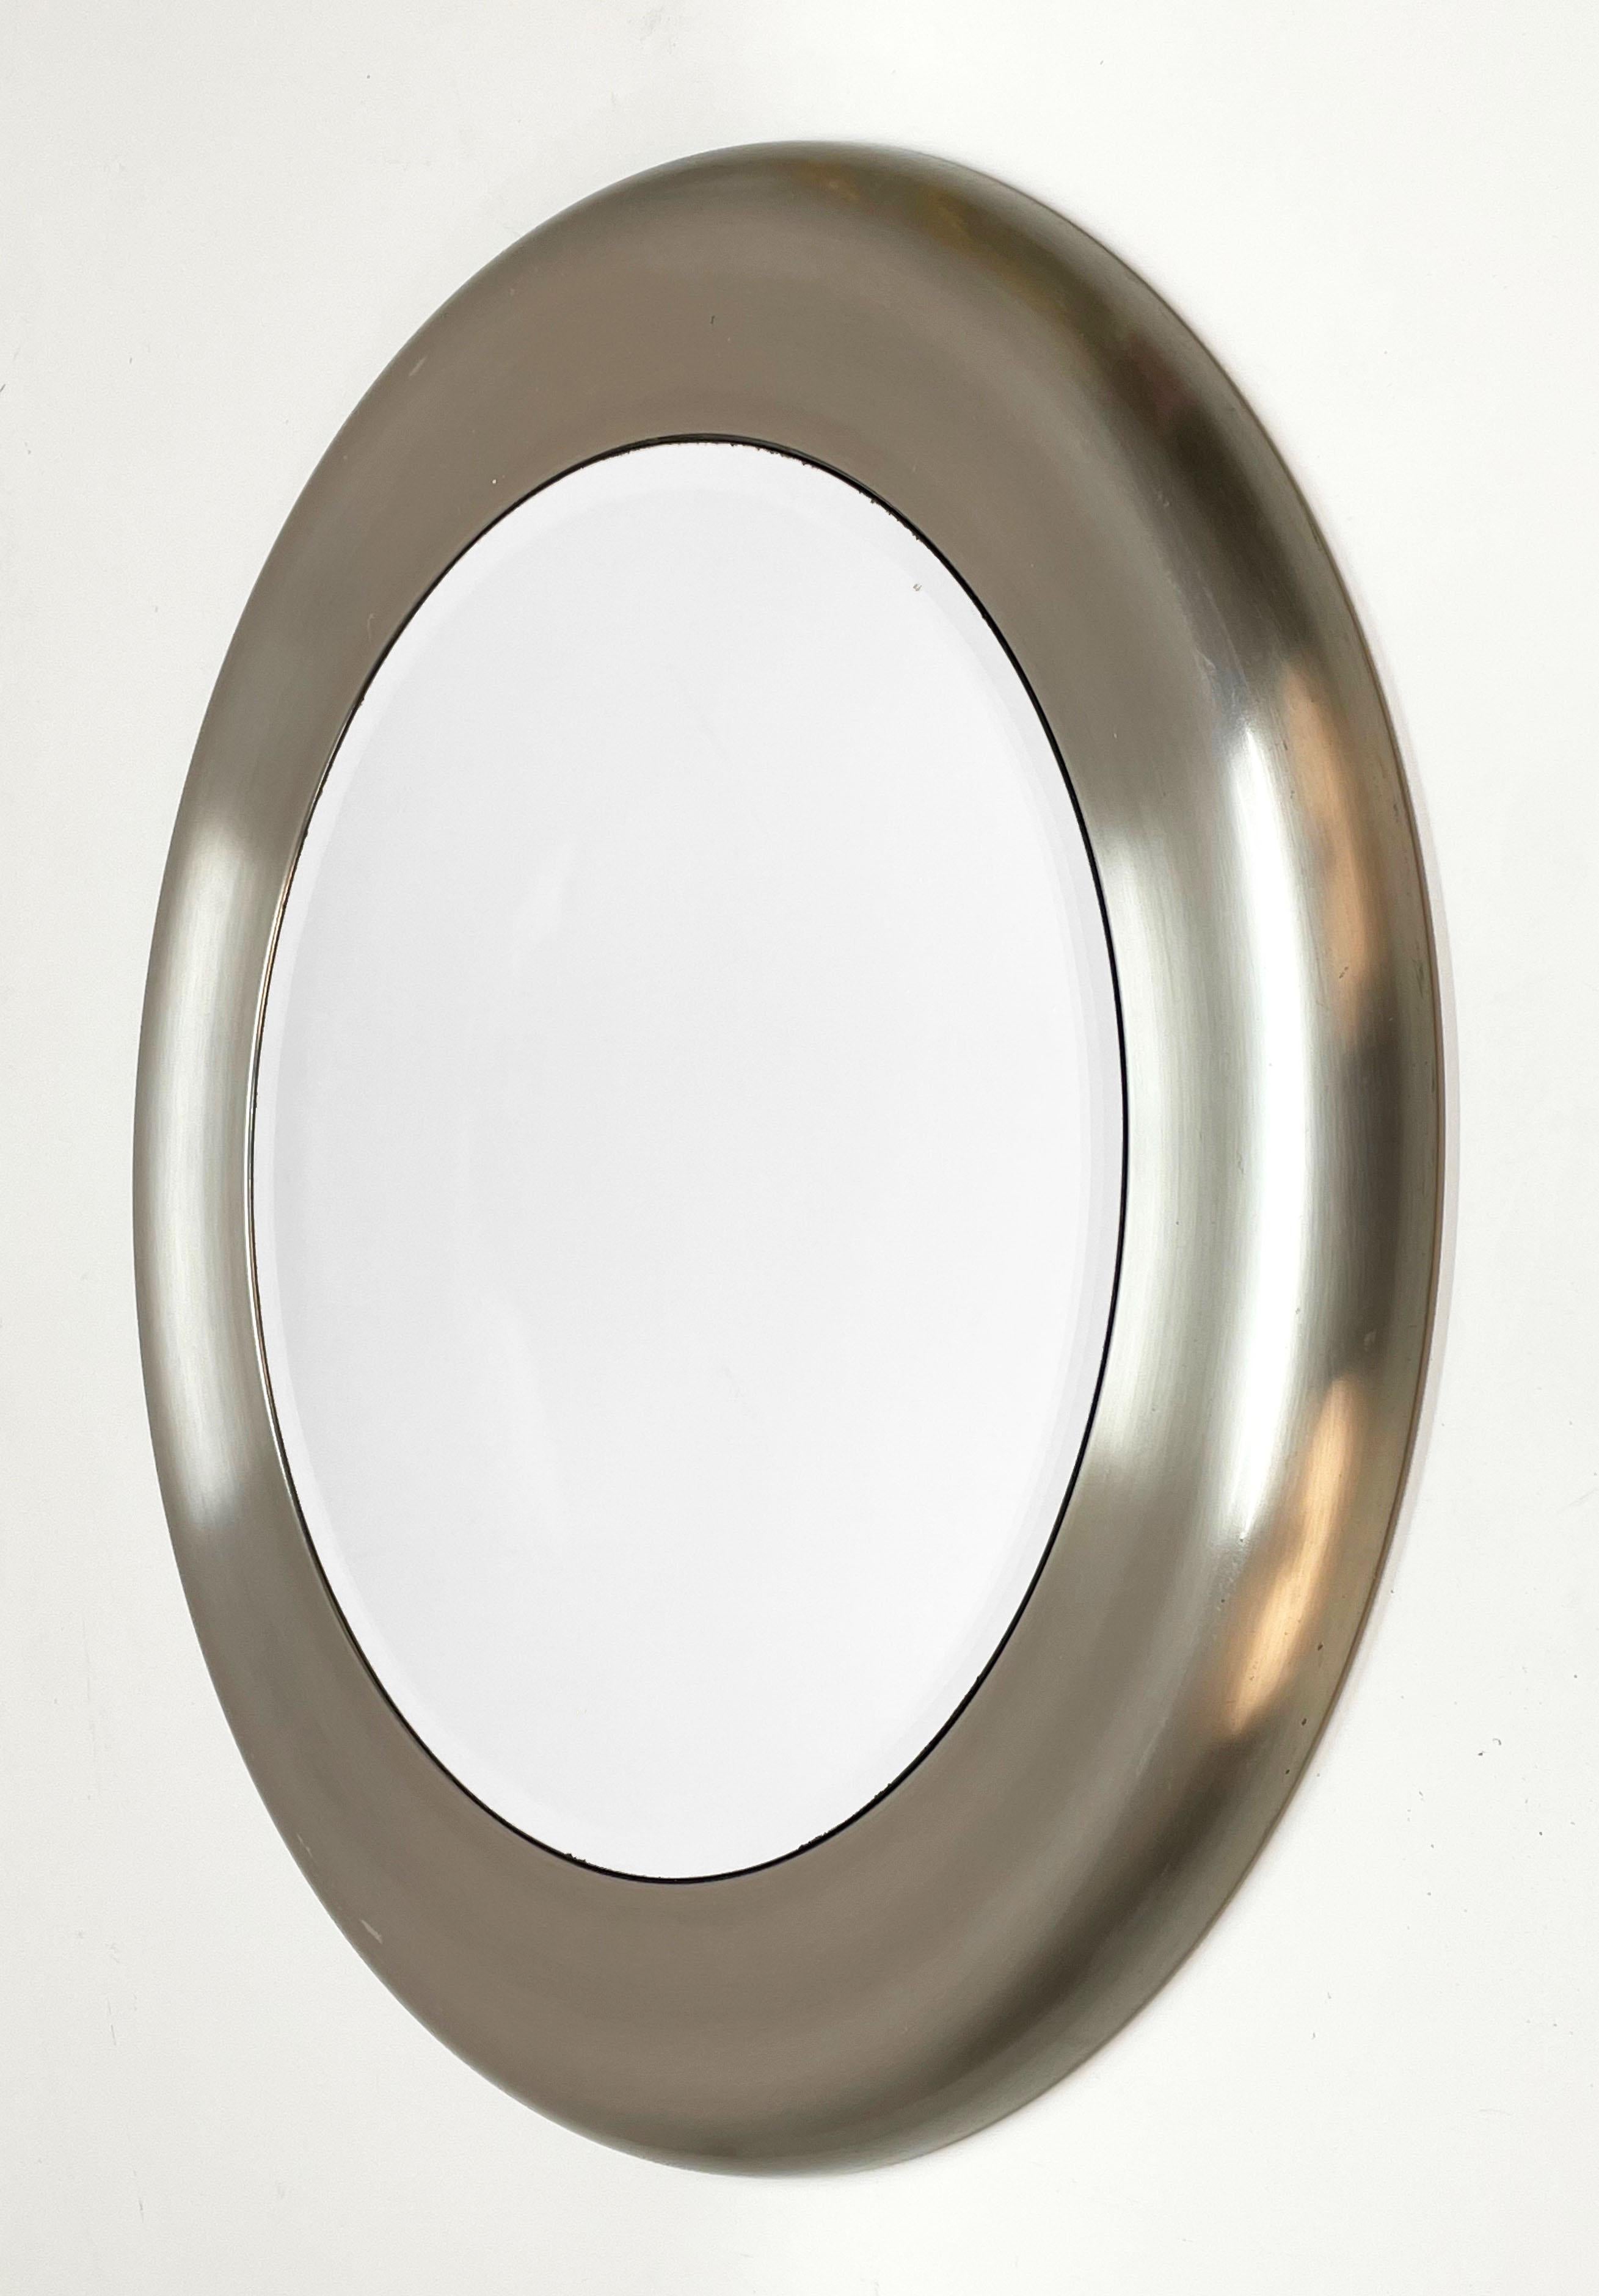 Midcentury Reggiani Italian Round Steel and Bevelled Wall Mirror, 1960s For Sale 14